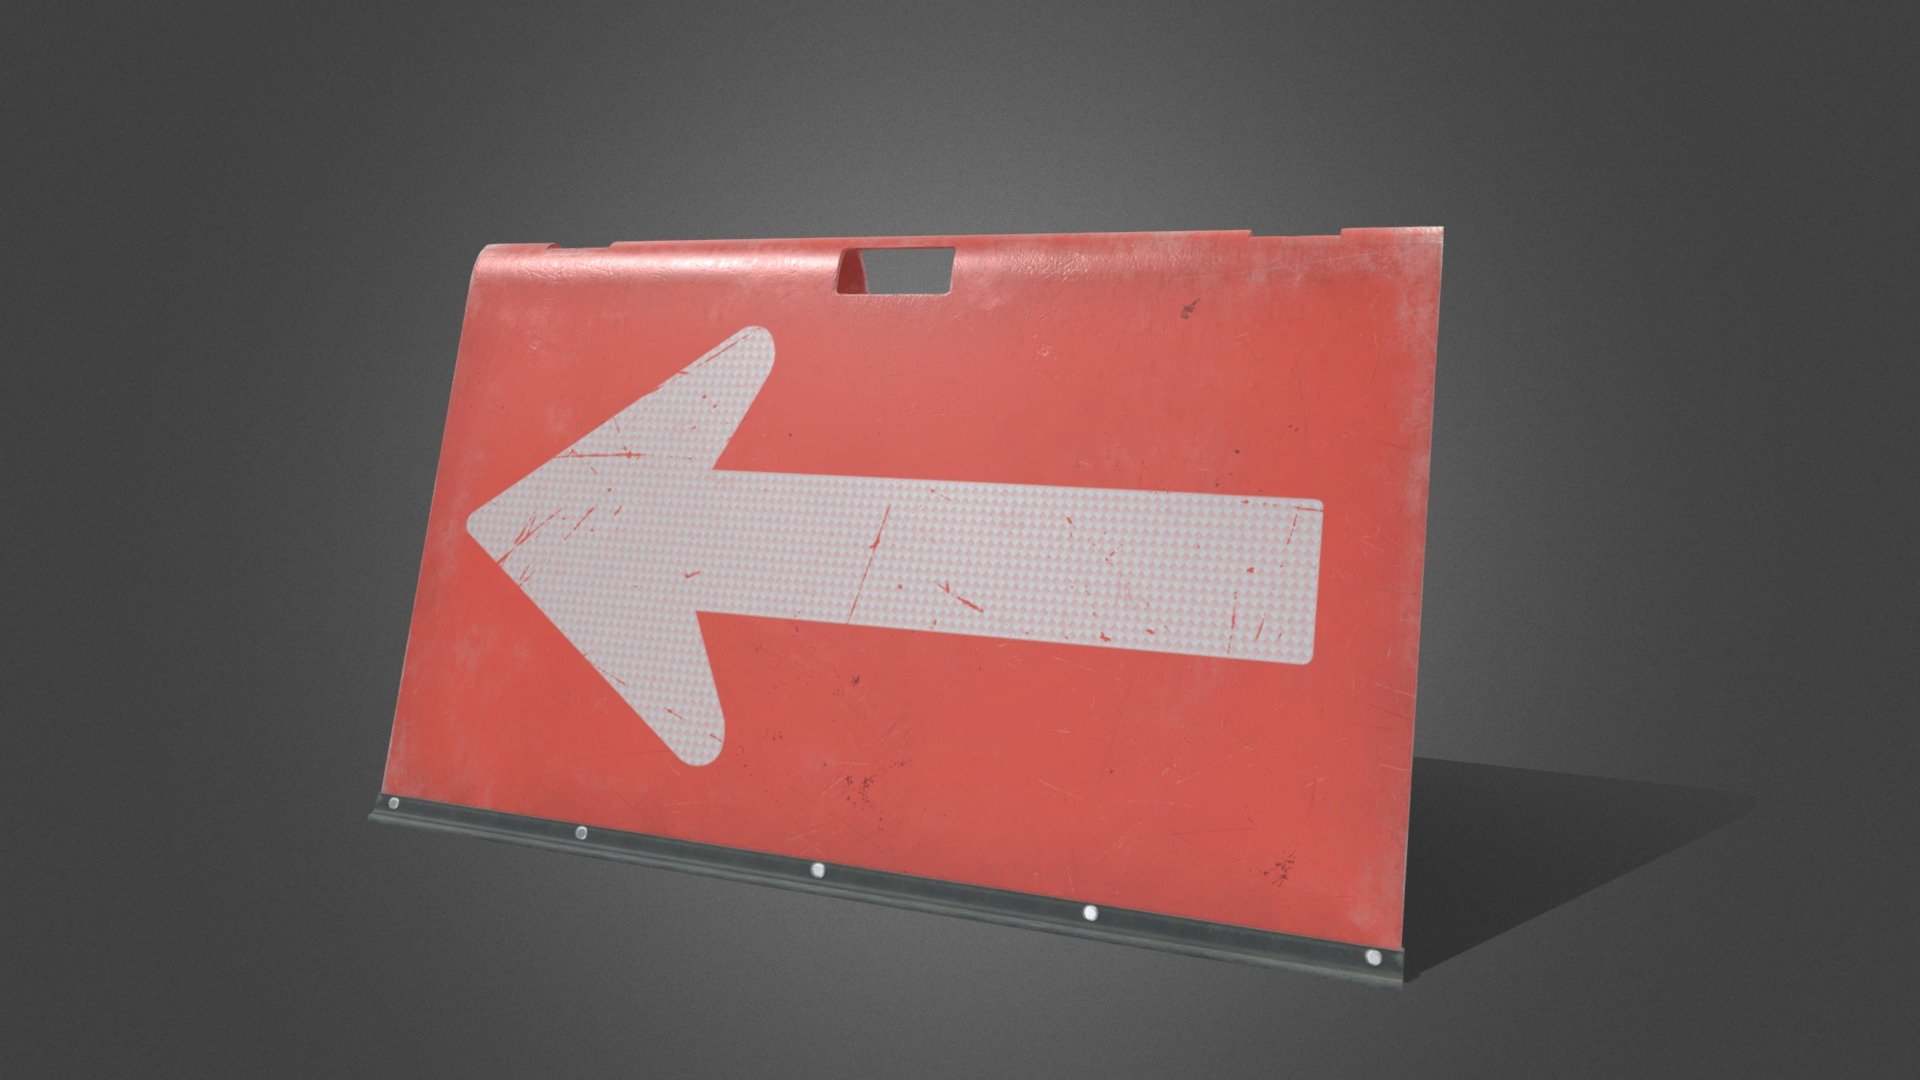 Low poly model for game.

You can purchase it here!!
https://www.unrealengine.com/marketplace/ja/product/87f4d767f36c440596e8cff32f57b4a7 - SignboardArrow - 3D model by 1kawam14 3d model